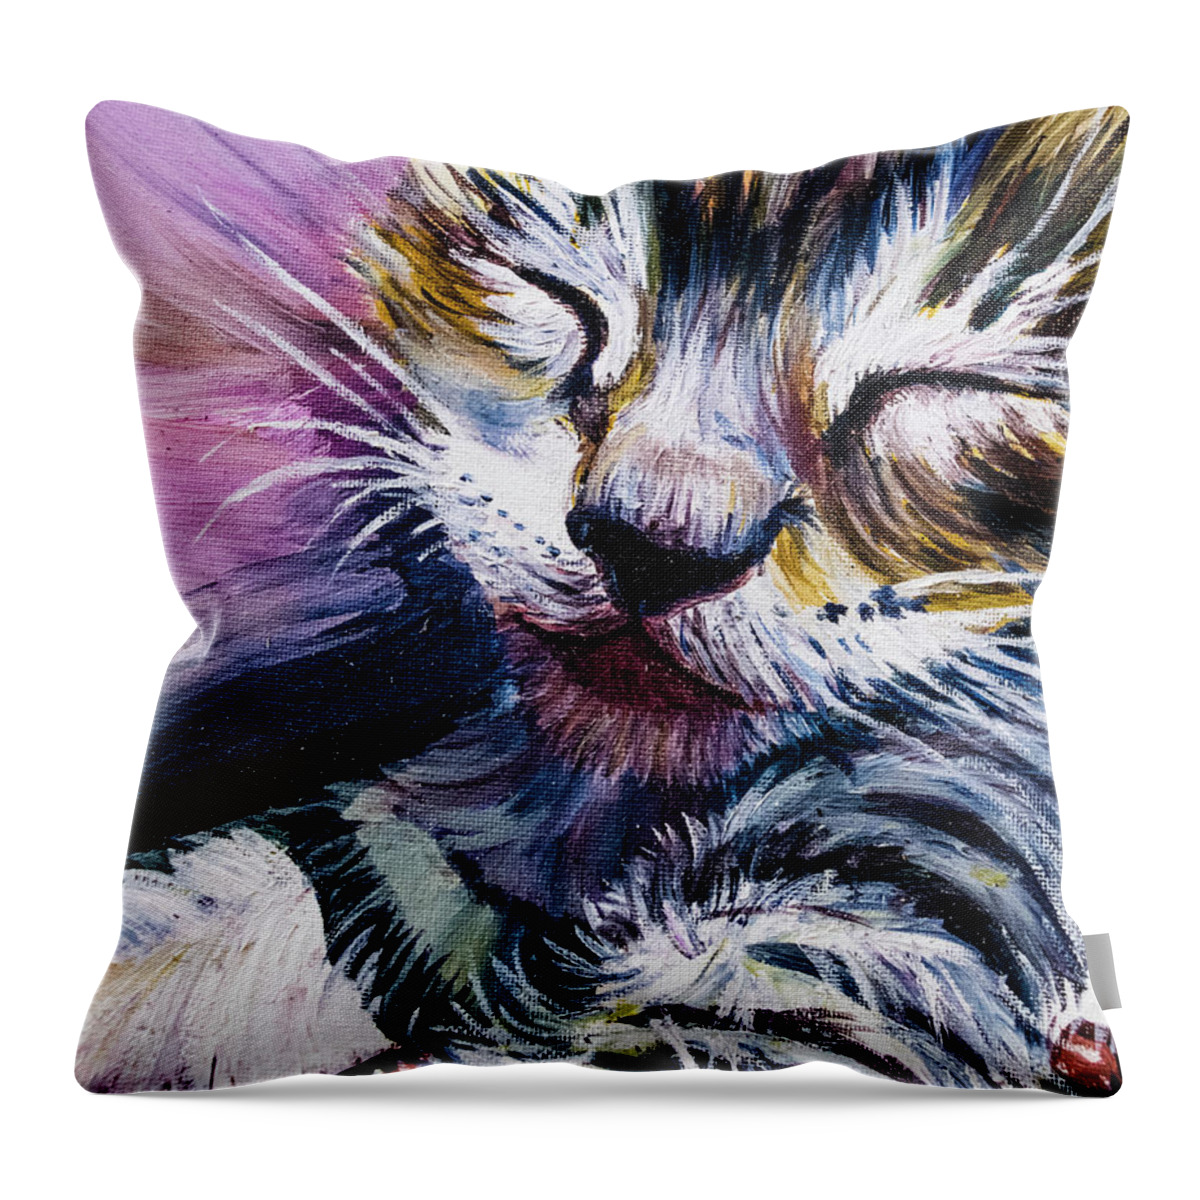 Kitten Pictures Throw Pillow featuring the painting Cute Sleepy Kitty by Rowan Lyford